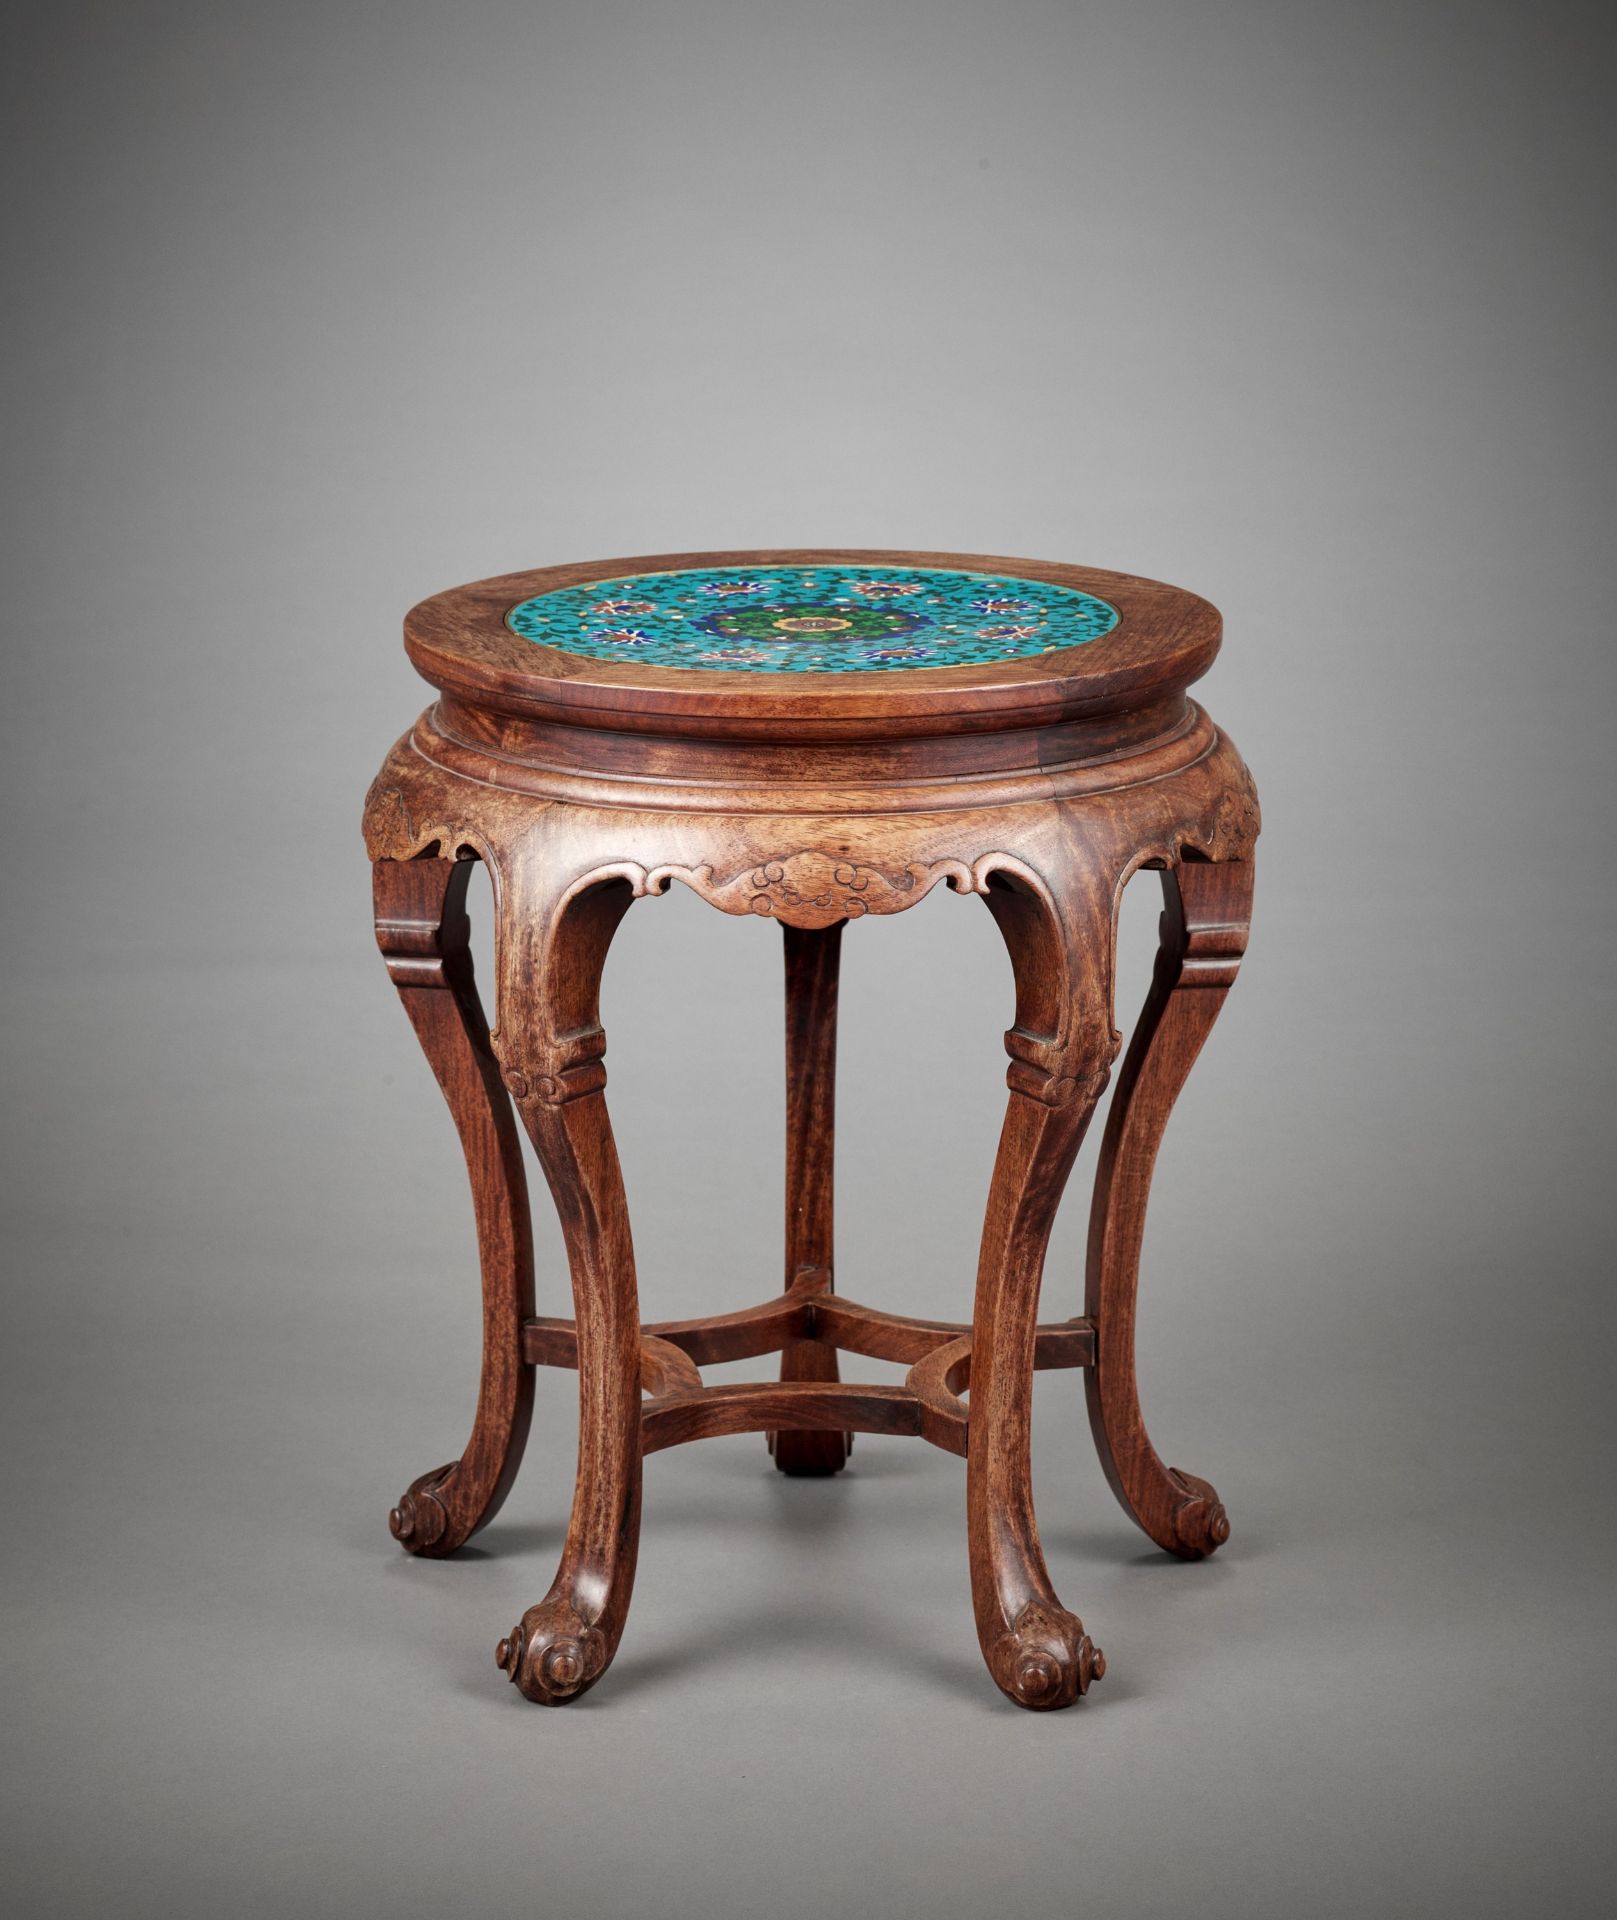 A CLOISONNE ENAMEL-INSET HARDWOOD STAND, LATE QING TO REPUBLIC